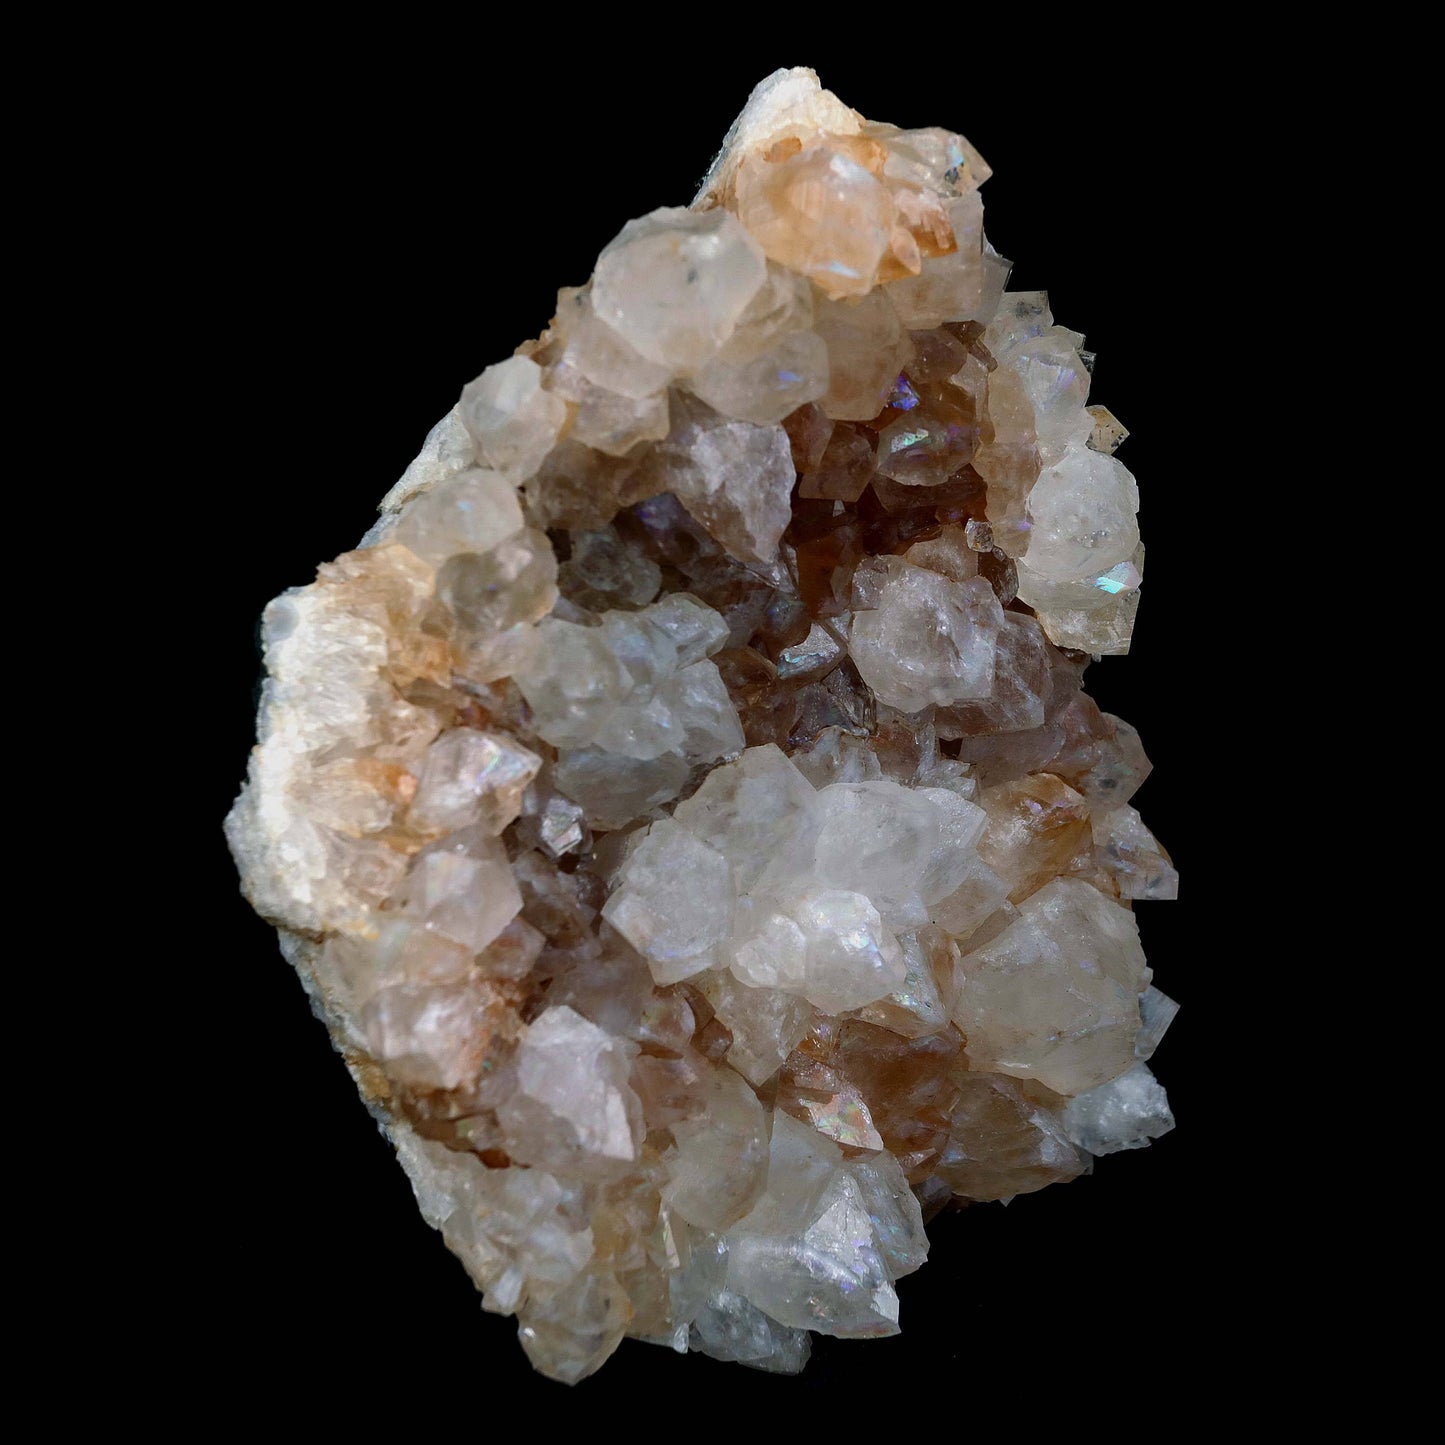 MM Quartz with Rainbow Effect 'Anandalite' Natural Mineral Specimen #…  https://www.superbminerals.us/products/mm-quartz-with-rainbow-effect-anandalite-natural-mineral-specimen-b-4611  Features: Anandalite, commonly known as Aurora Quartz or Rainbow Quartz, is mined in India. The tiny points of the clusters reflect dazzling rainbows that form on the surface of the quartz (as opposed to the internal rainbows that reflect from within in other mineral specimens.) Surface rainbow reflections